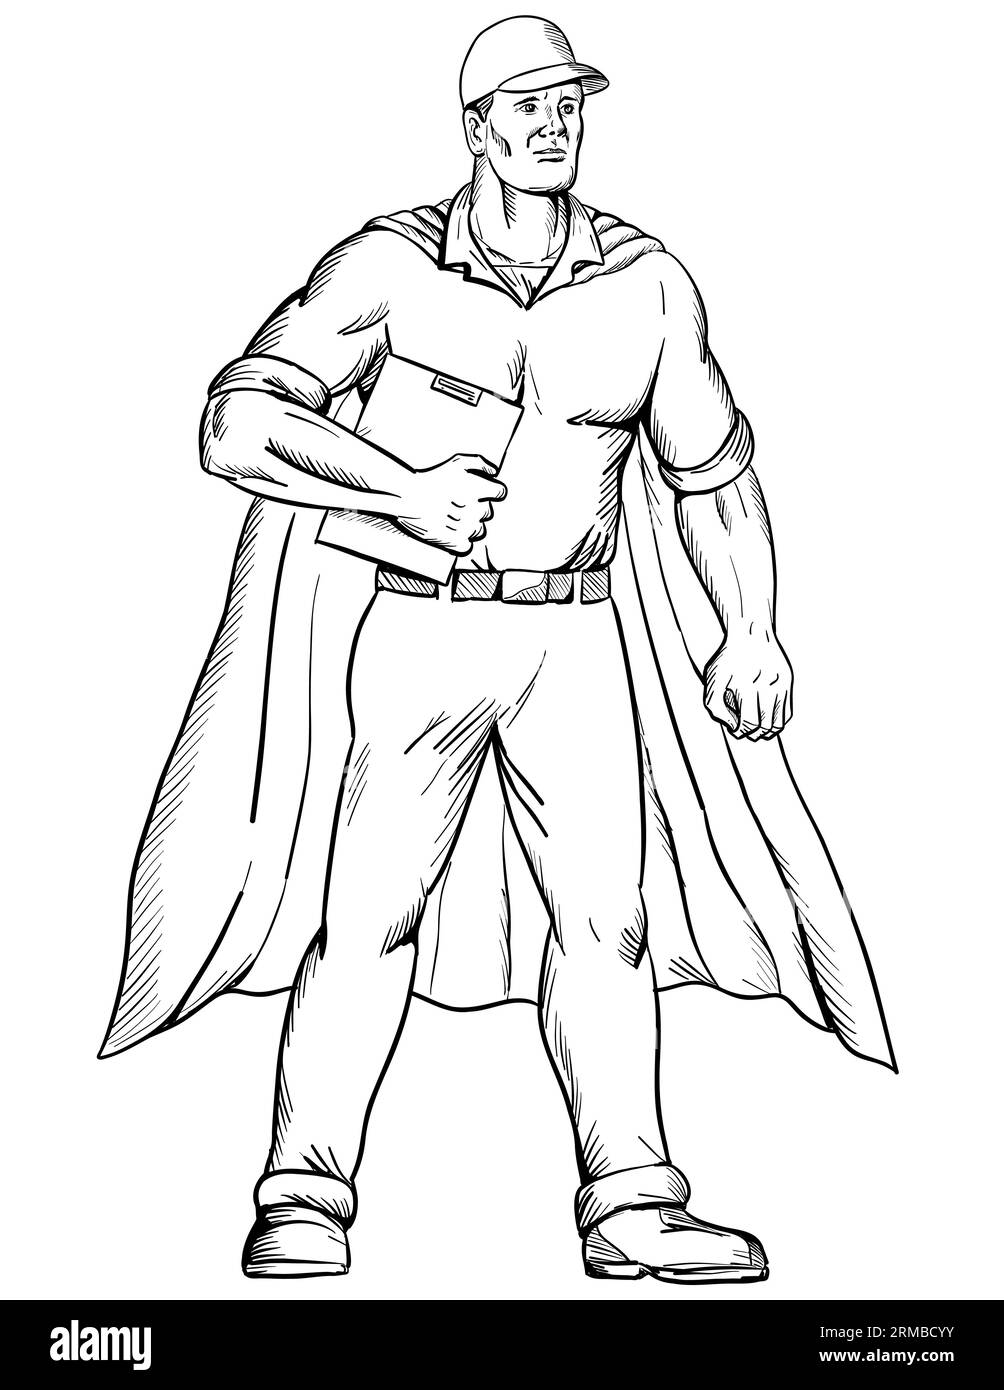 Drawing sketch style illustration of a worker as a superhero wearing a cape and holding a clipboard standing viewed from front on isolated white backg Stock Photo